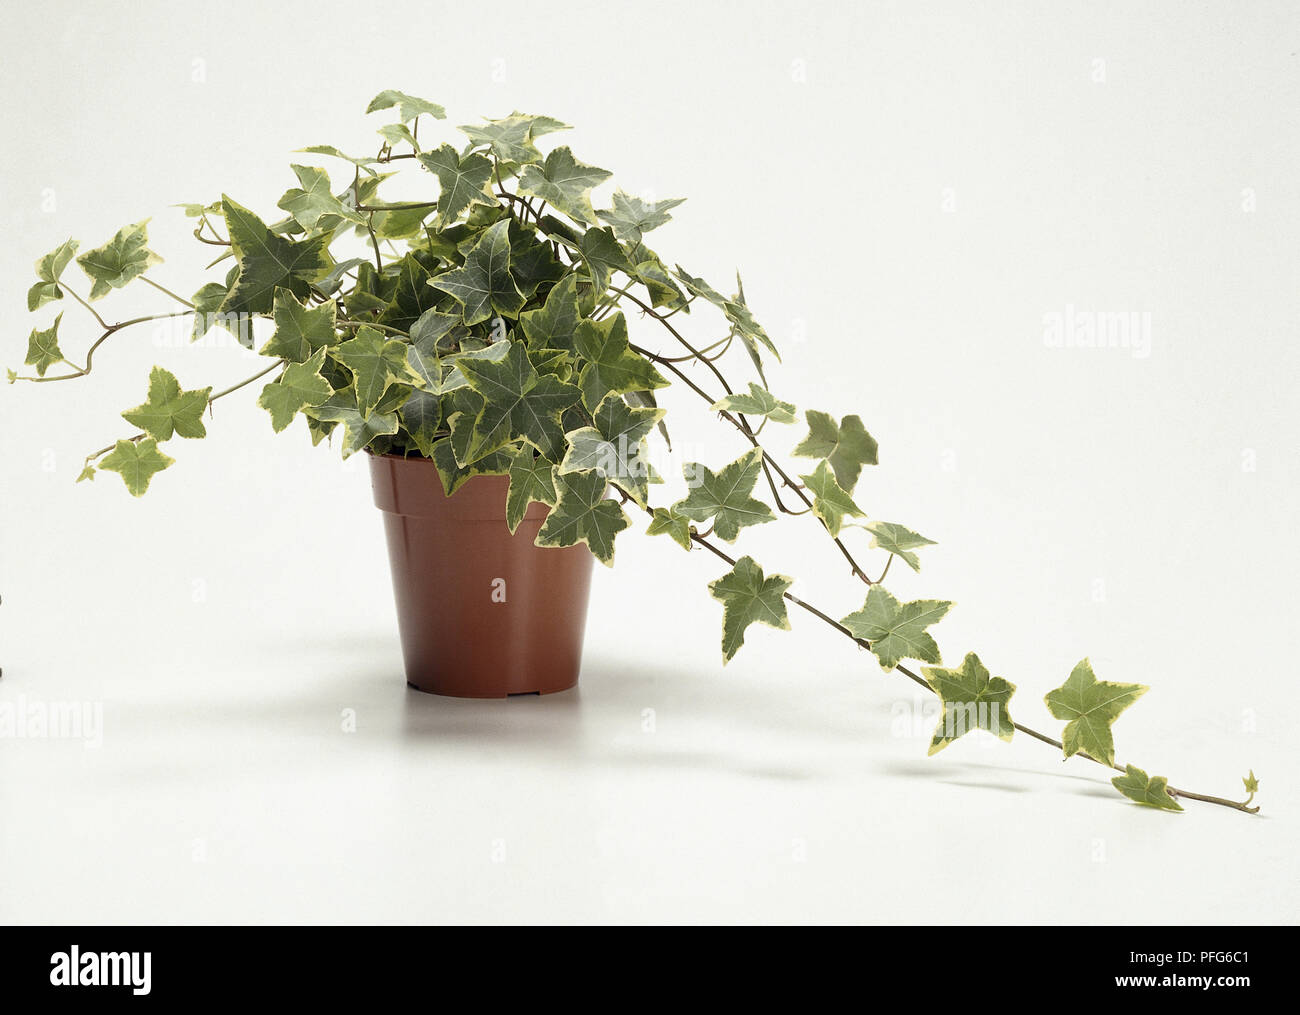 Hedera helix, trailing plant in a pot Stock Photo - Alamy